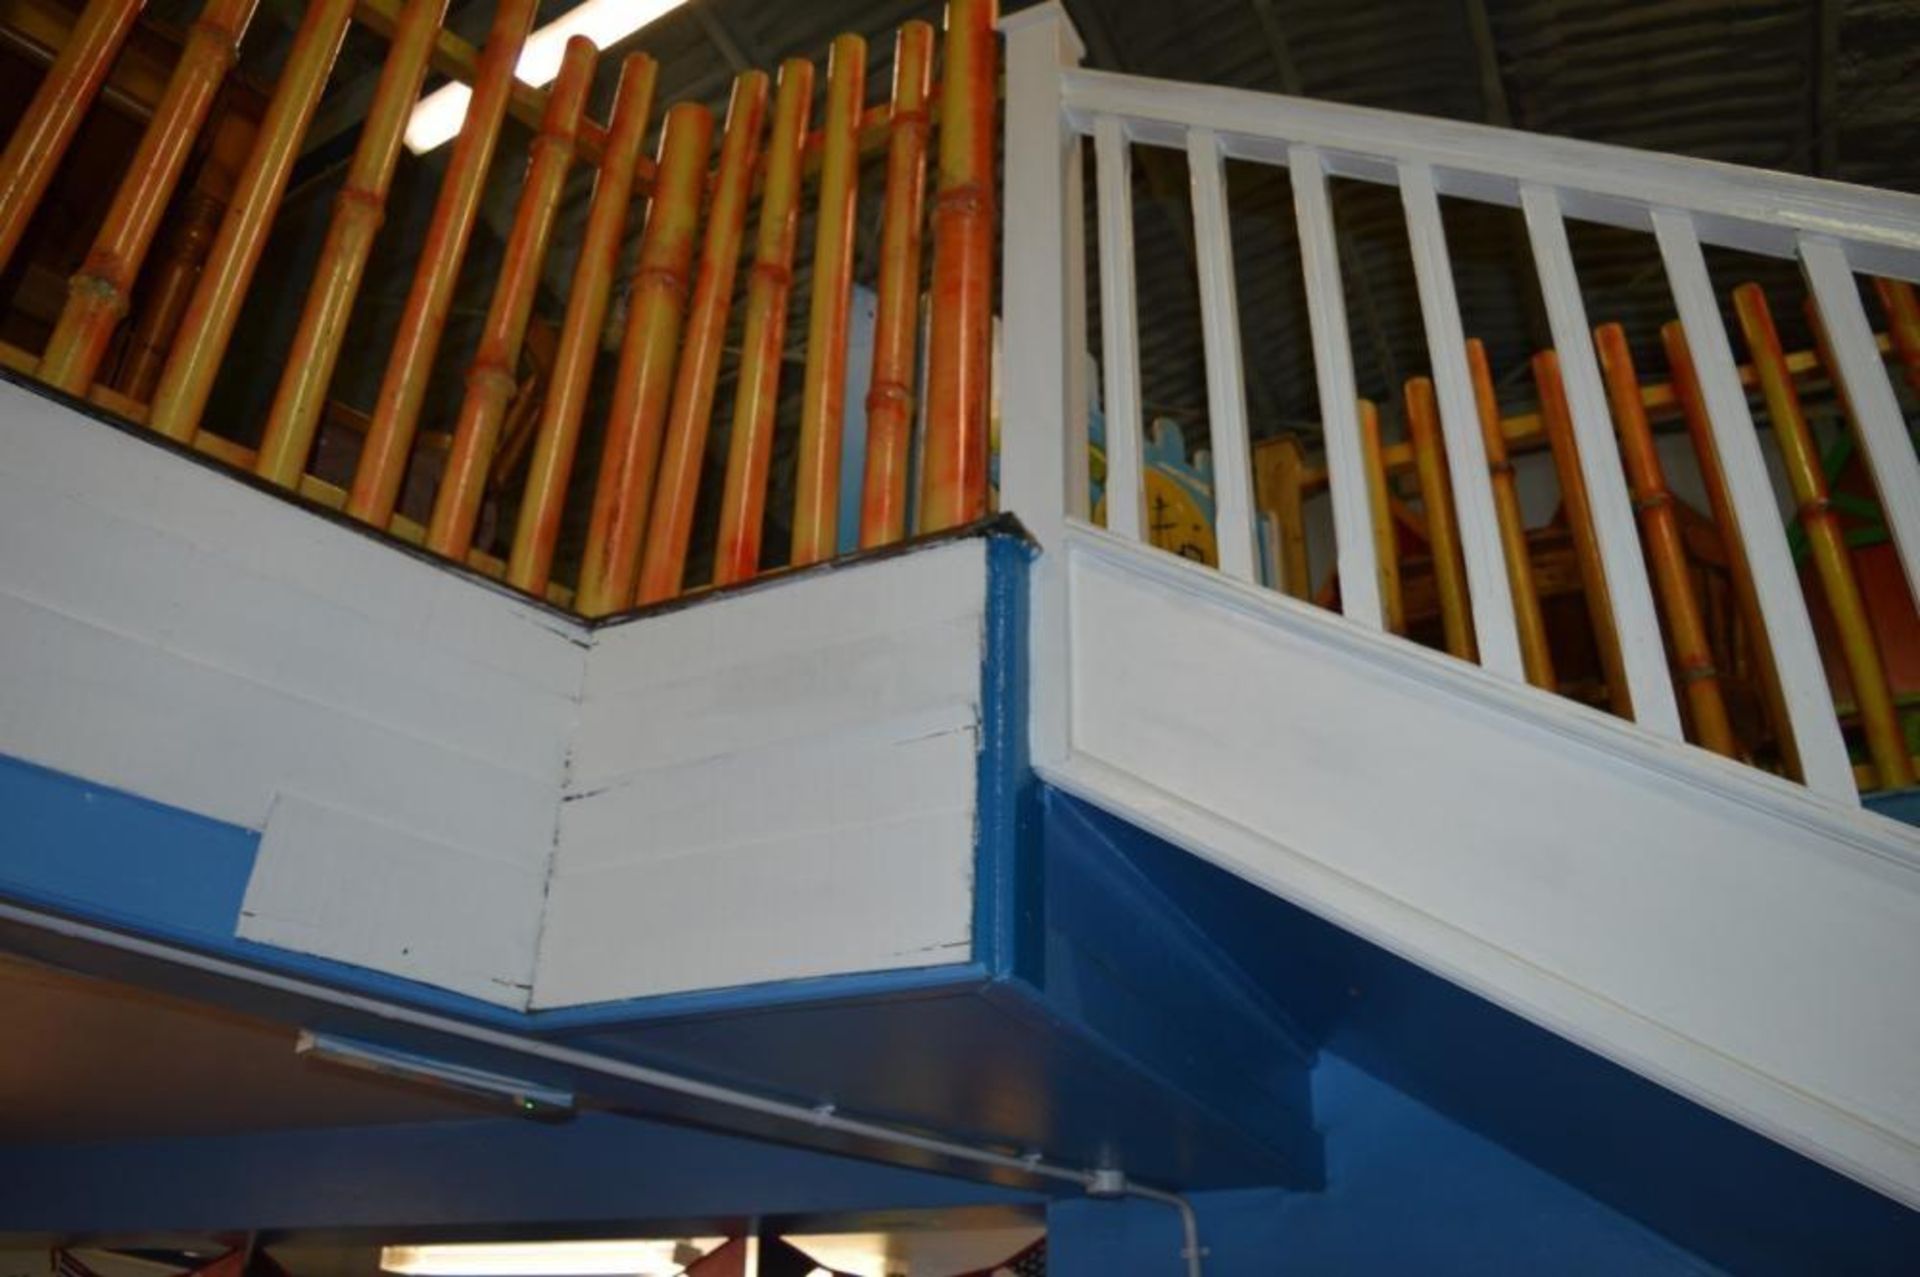 1 x Large Mezzanine Floor With Staircase - H230 x W1700 x D1200 cms - CL351 - Location: Chorley PR6 - Image 6 of 8